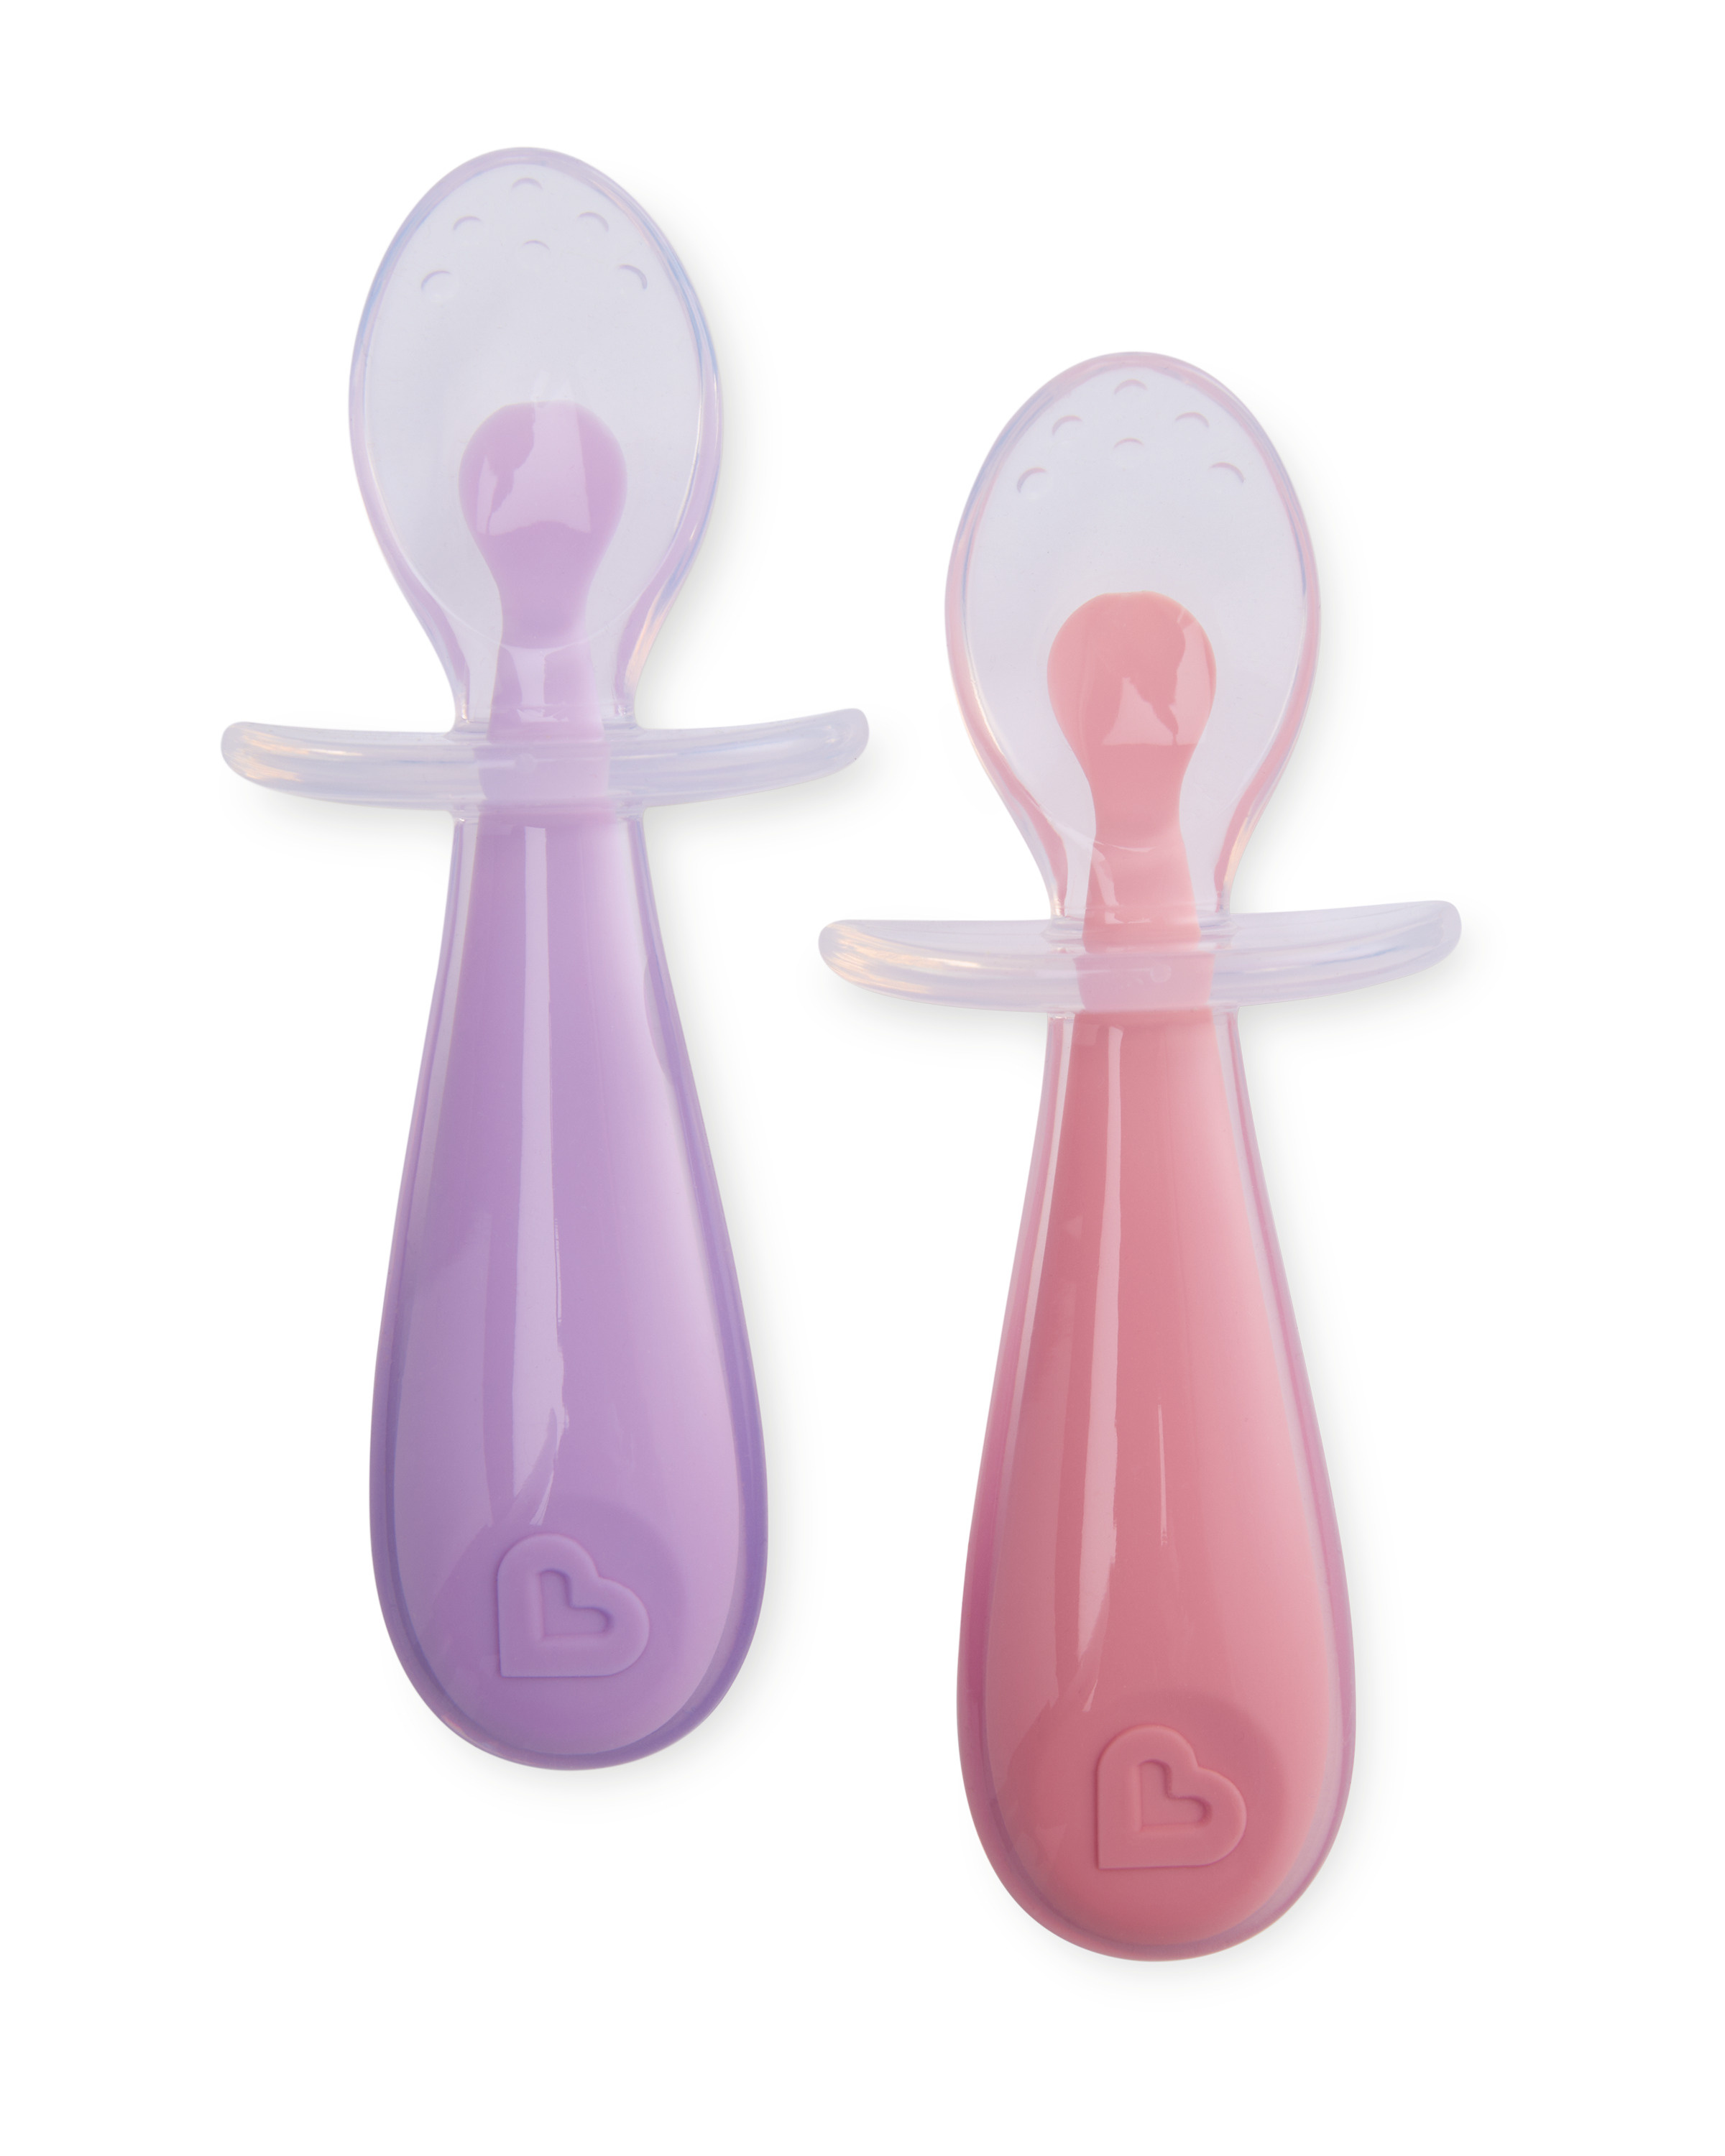 Munchkin Silicone Trainer Spoon, 4 Pack, Pink/Purple